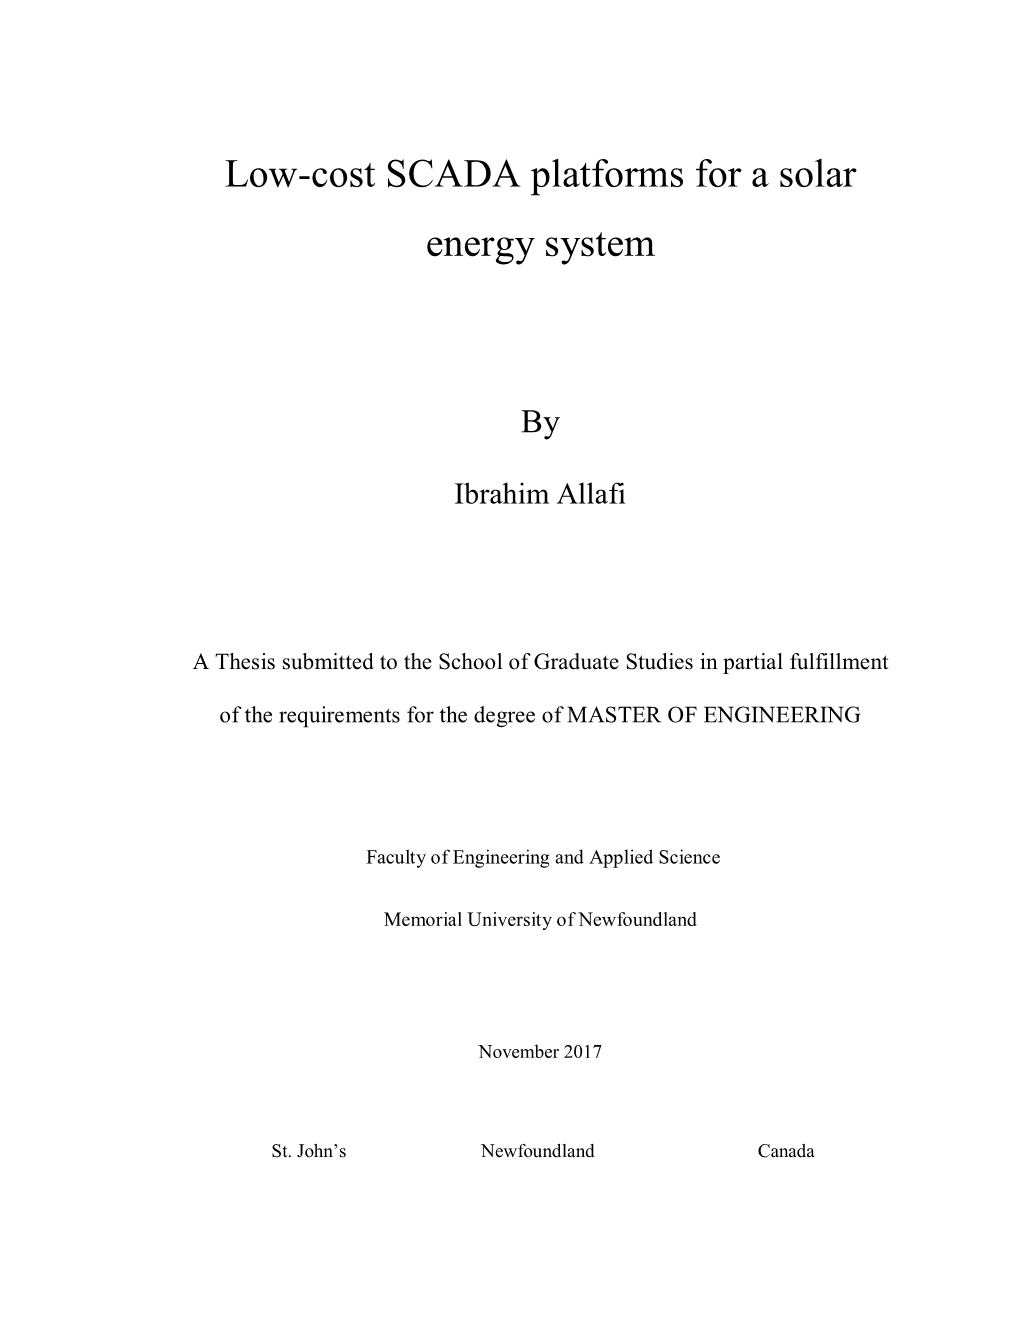 Low-Cost SCADA Platforms for a Solar Energy System